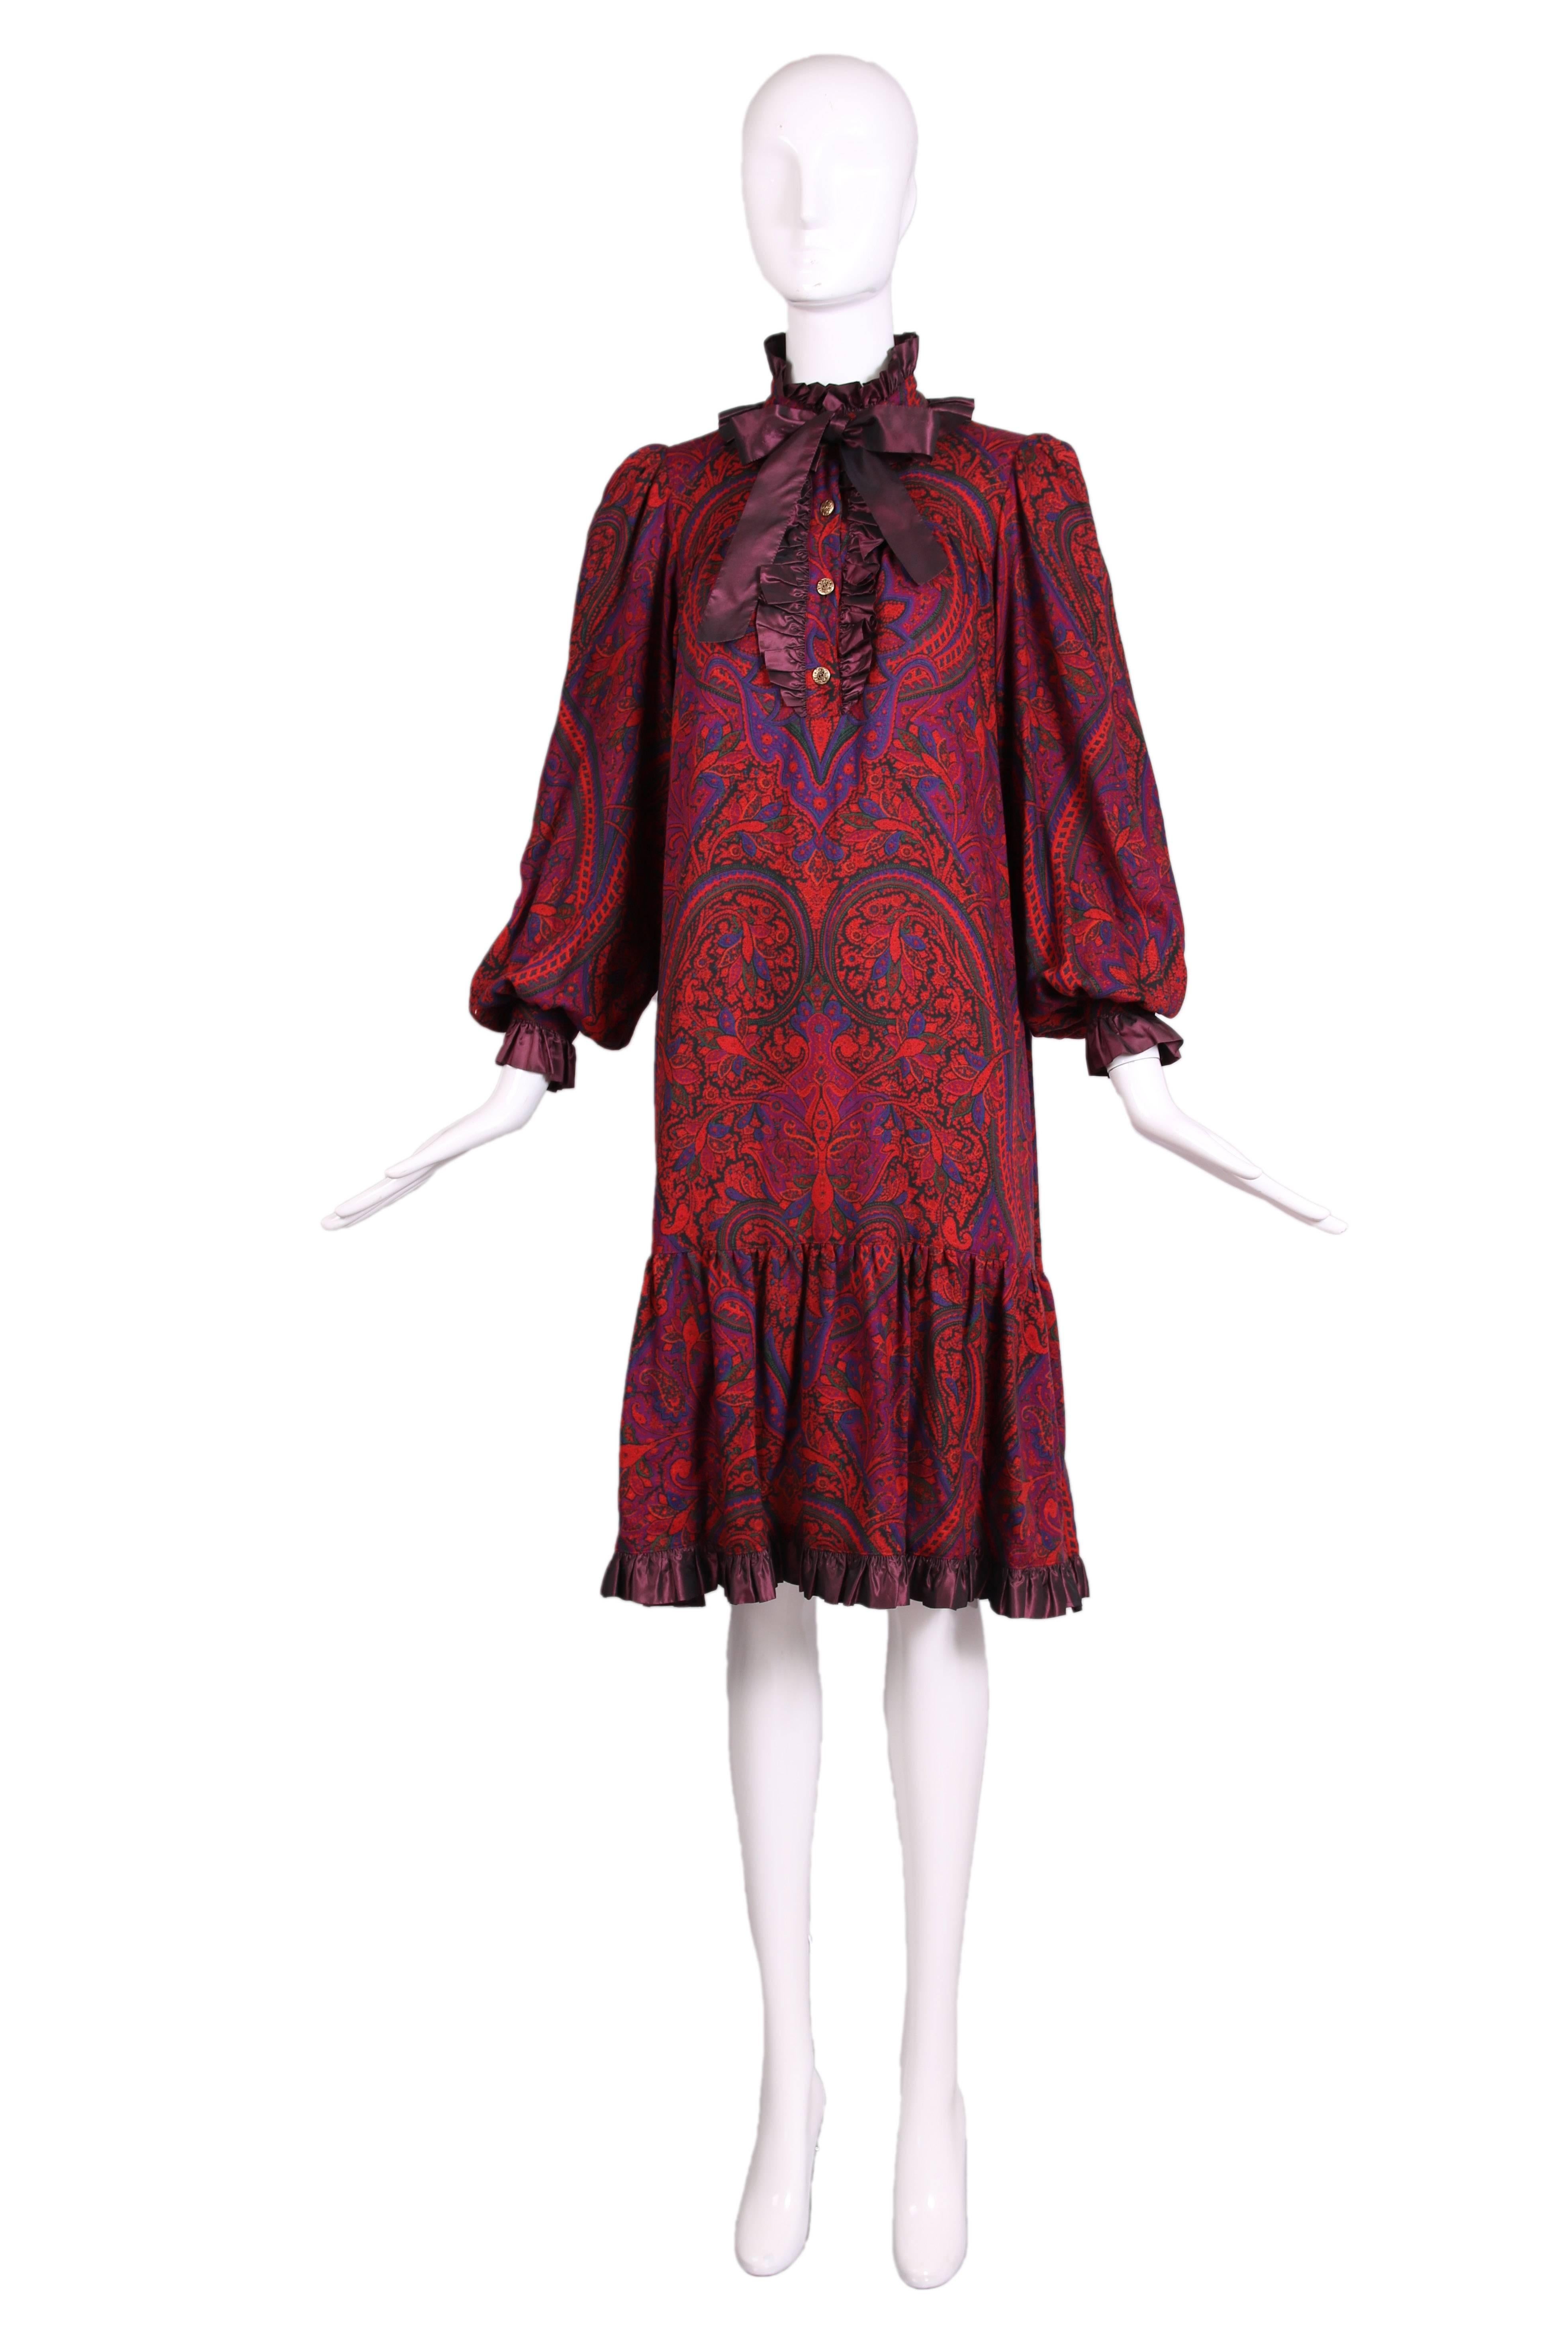 1970's Yves Saint Laurent light-weight wool paisley print smock dress in shades of purple, green, blue and orange-red with purple taffeta ruffled trim. Features metal paisley design buttons and hidden pockets at either side seam. In excellent